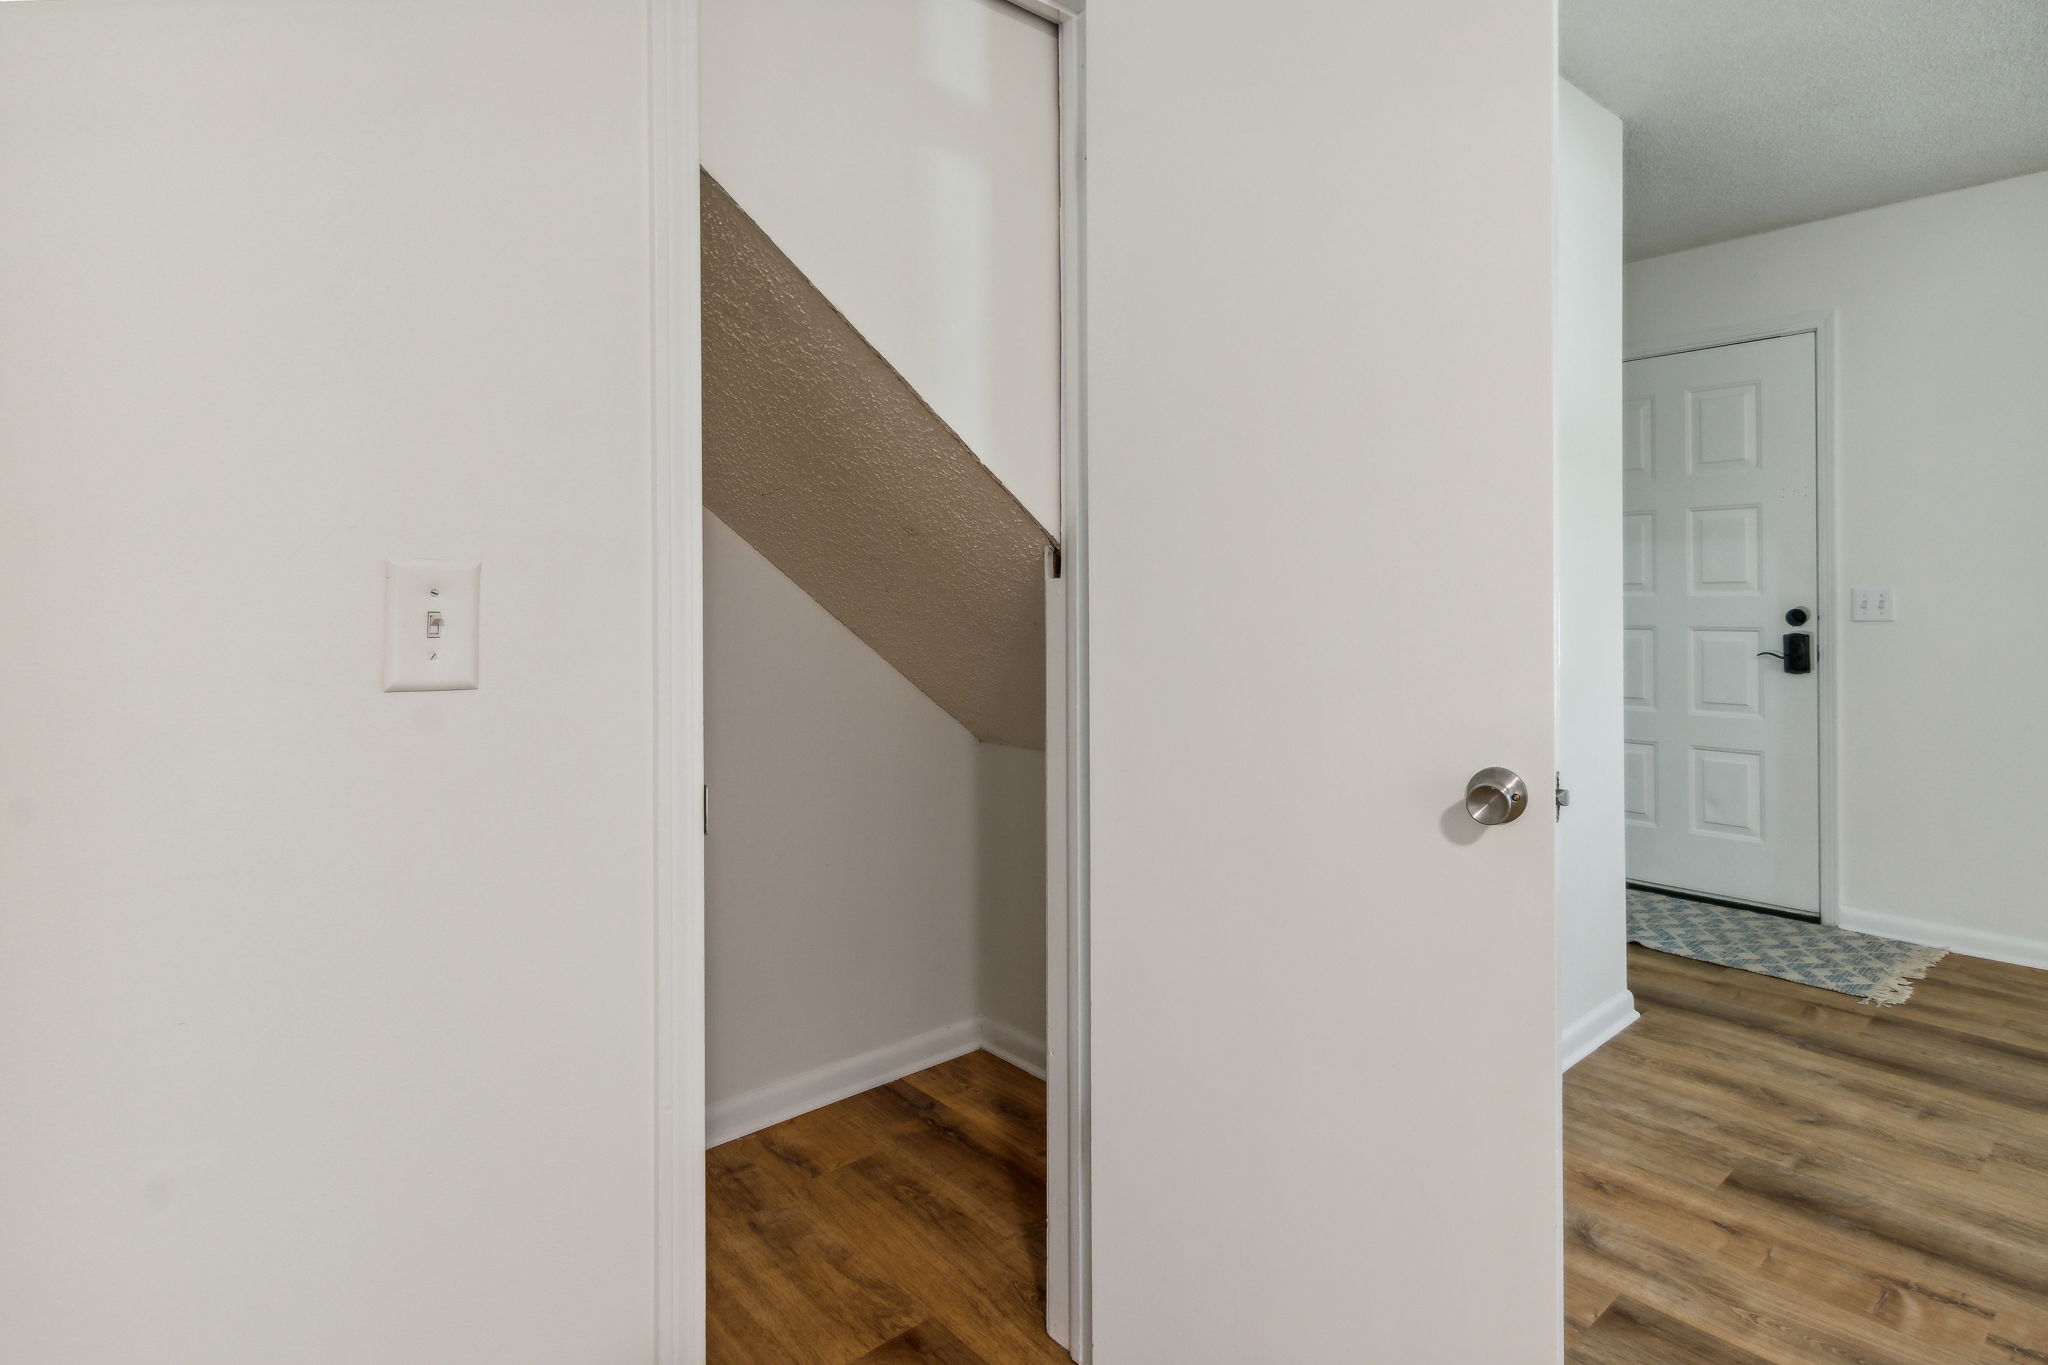 Each unit features additional storage beneath the stairwell